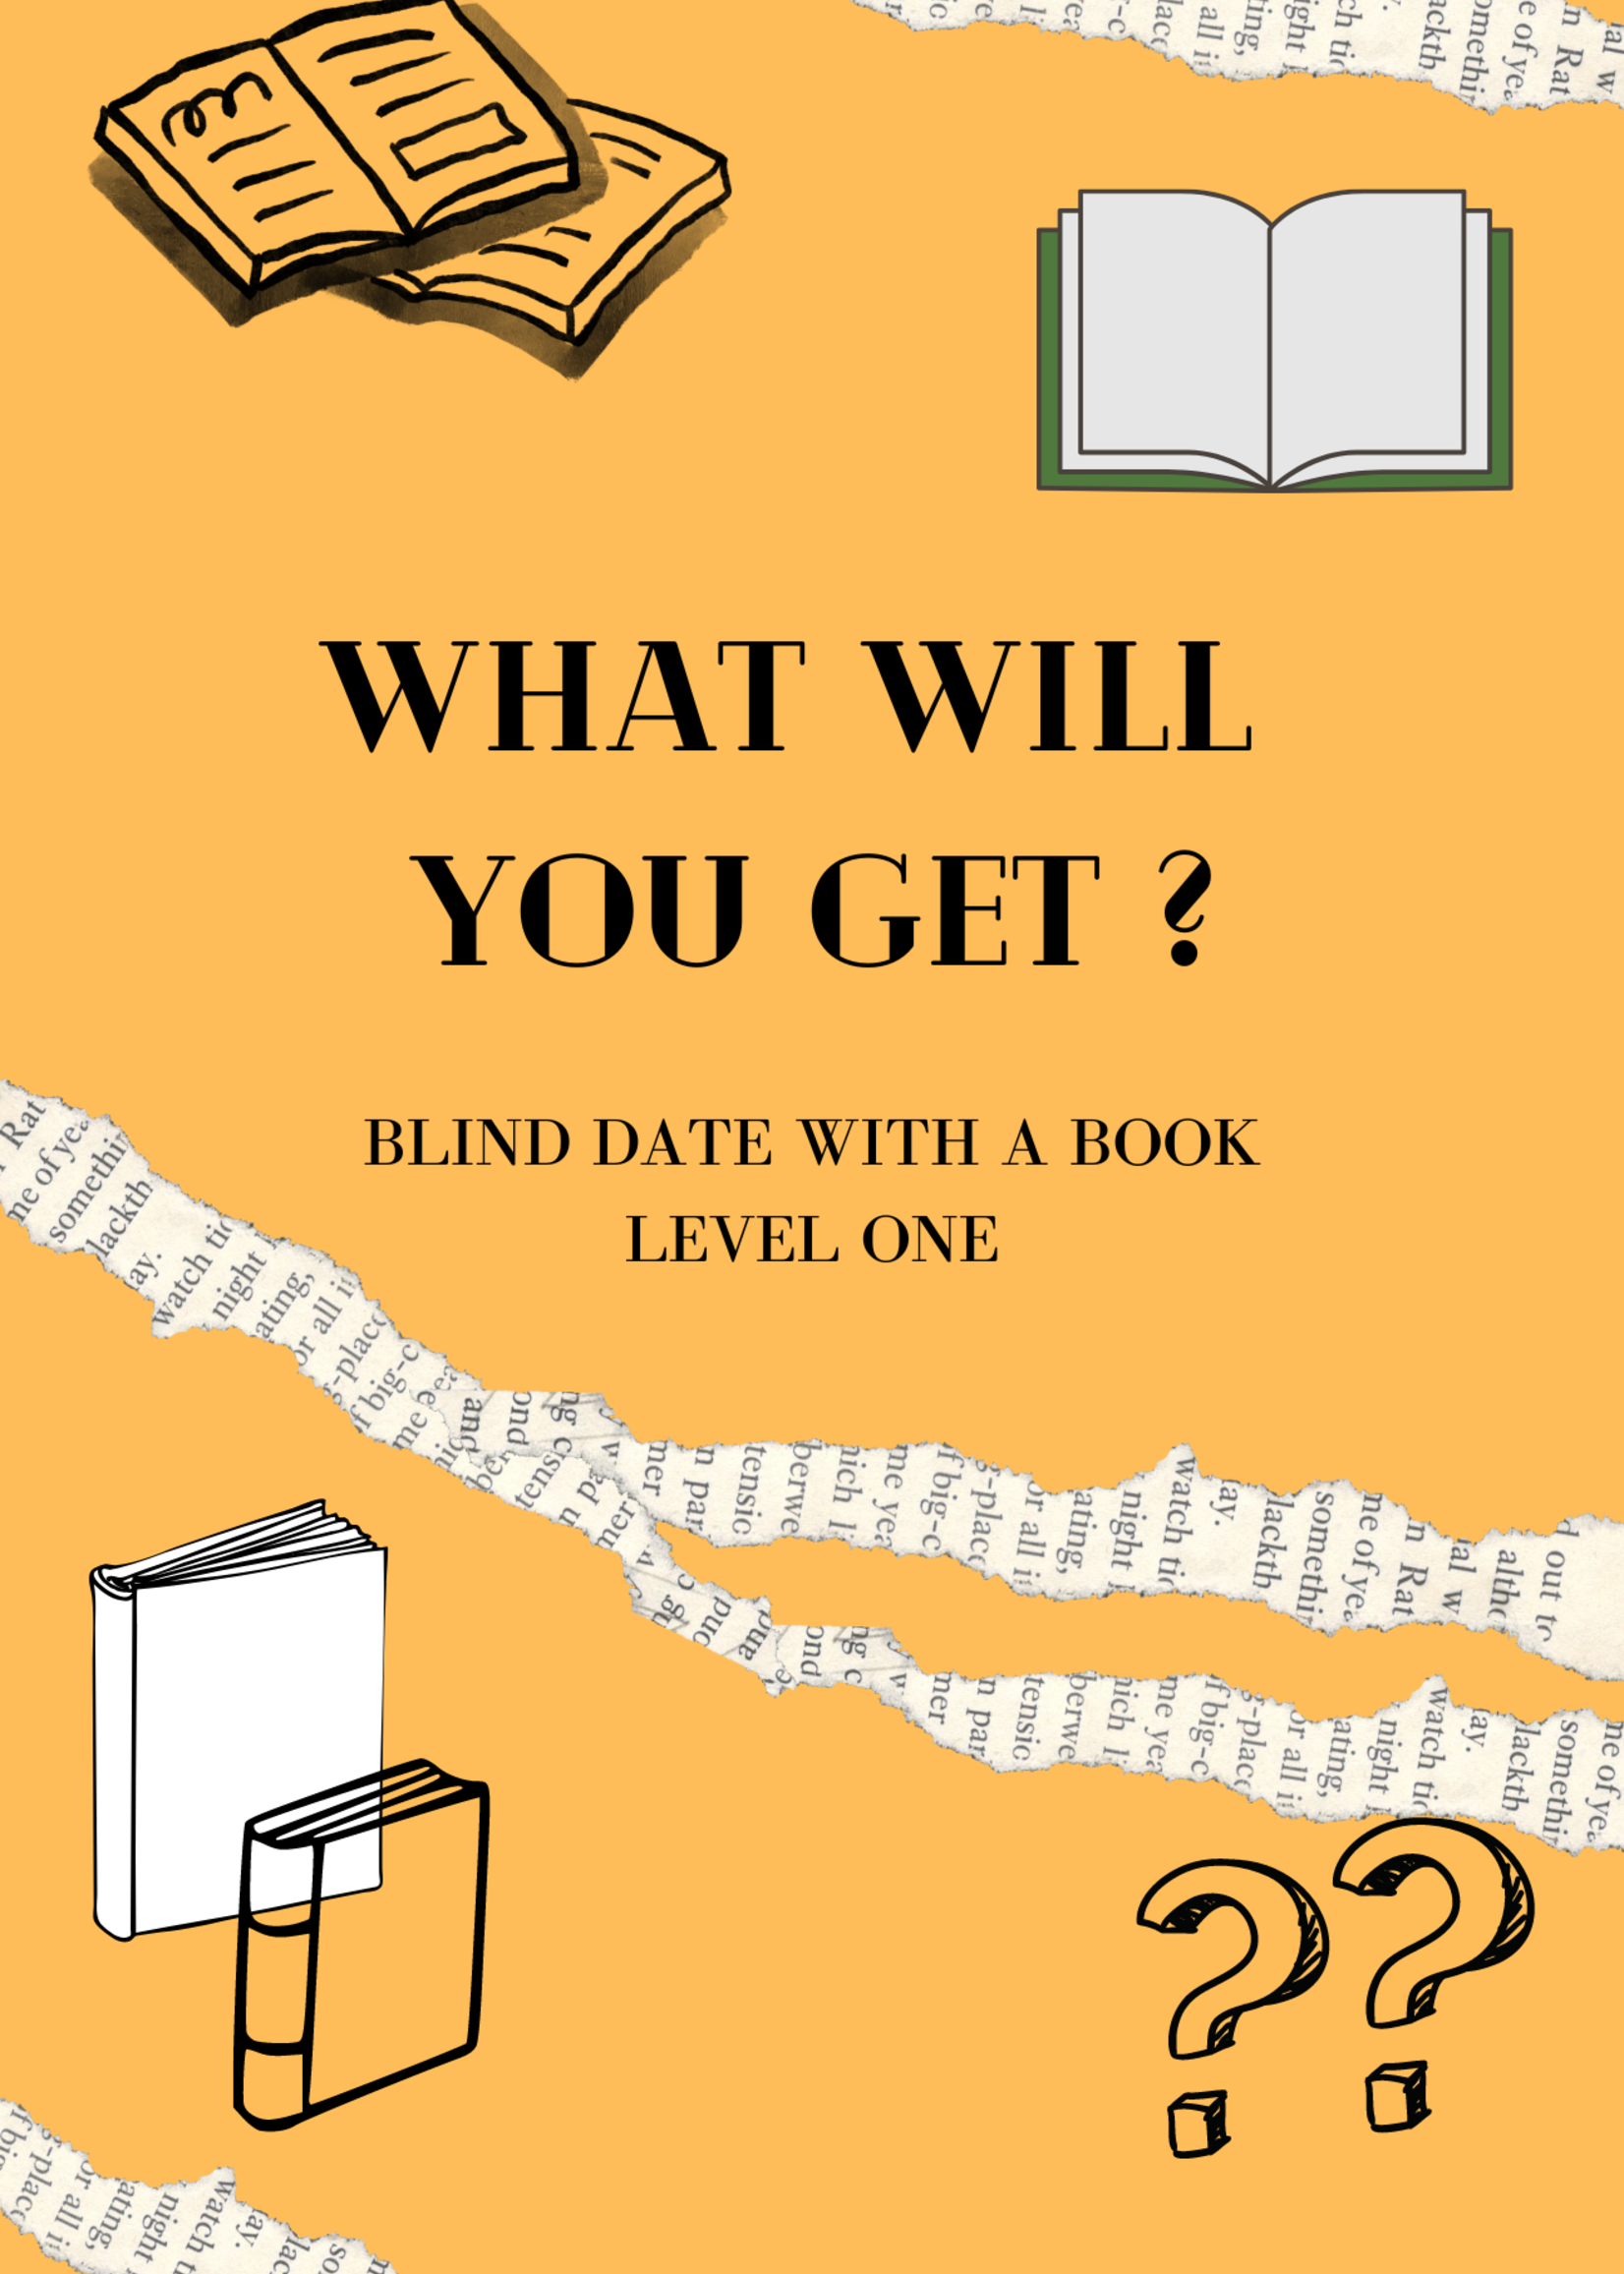 ONLINE BLIND DATE WITH A BOOK - LEVEL 1